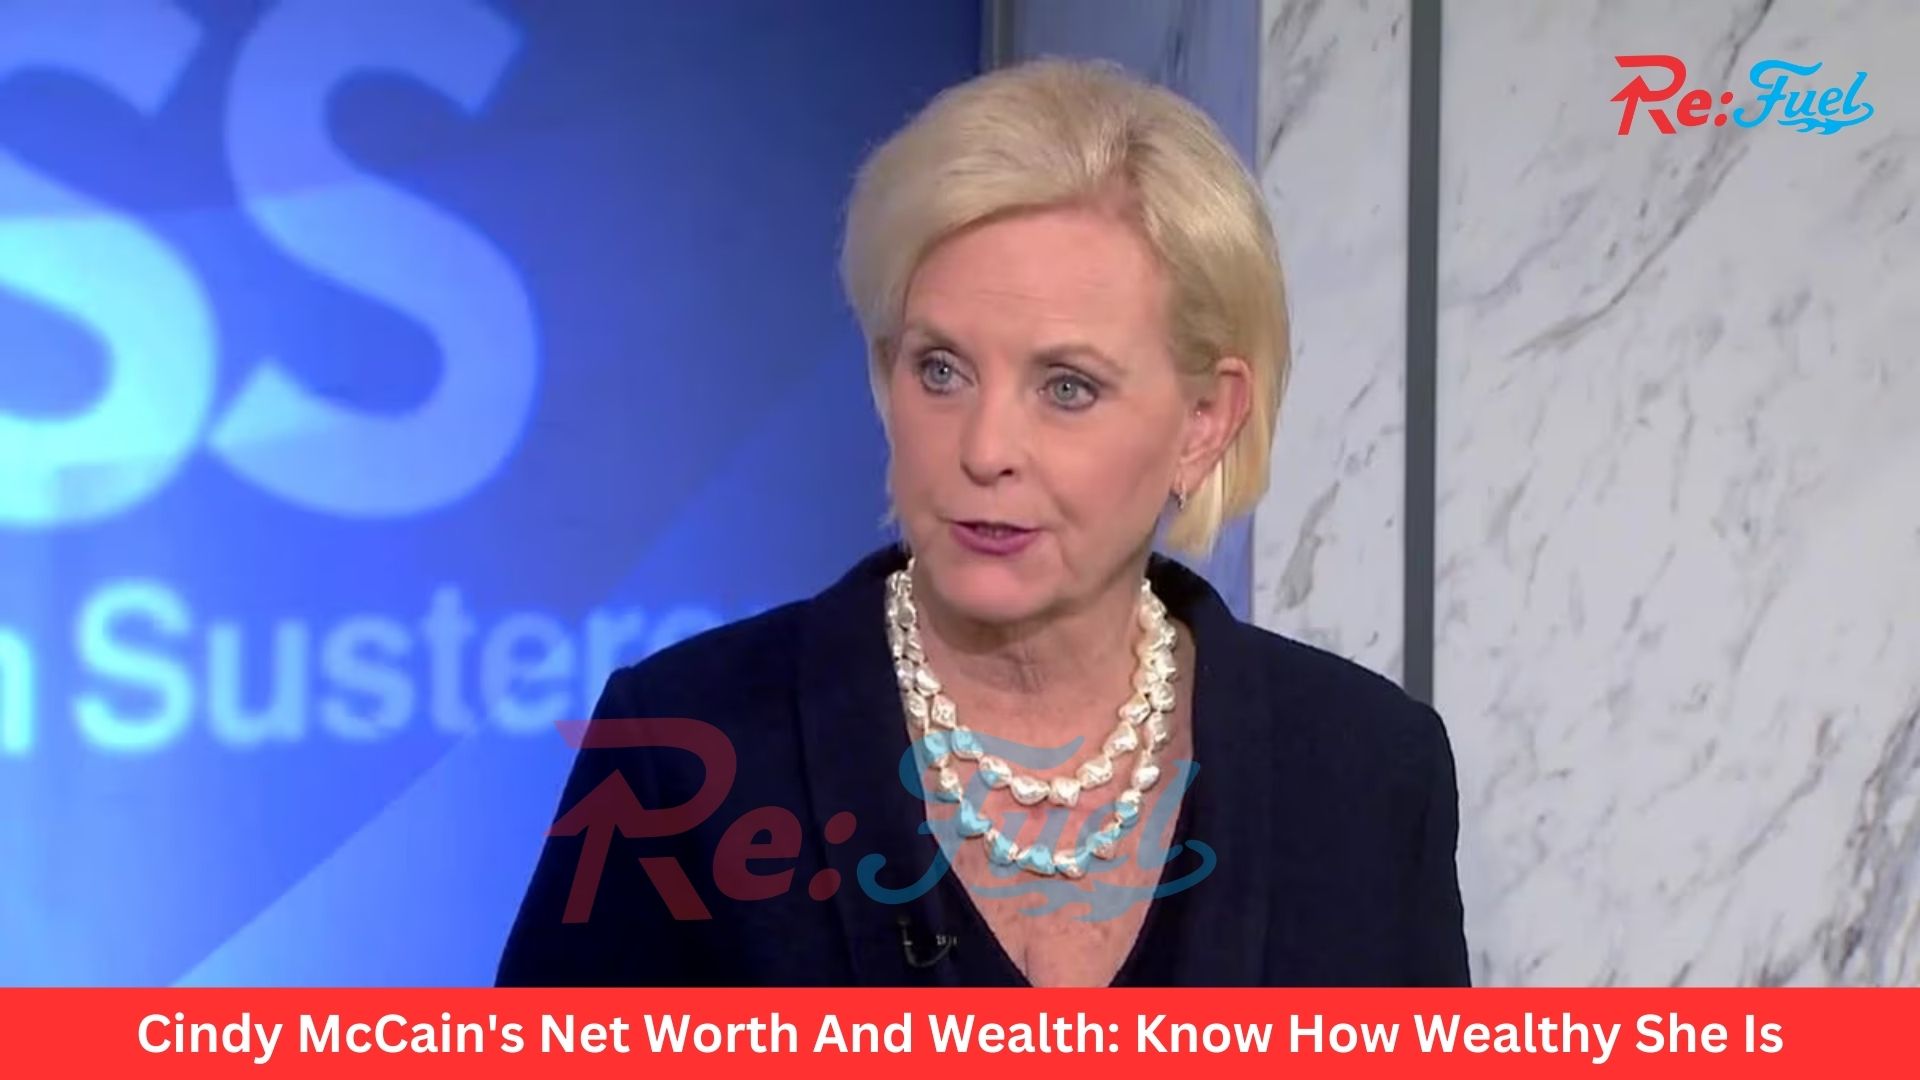 Cindy McCain's Net Worth And Wealth: Know How Wealthy She Is